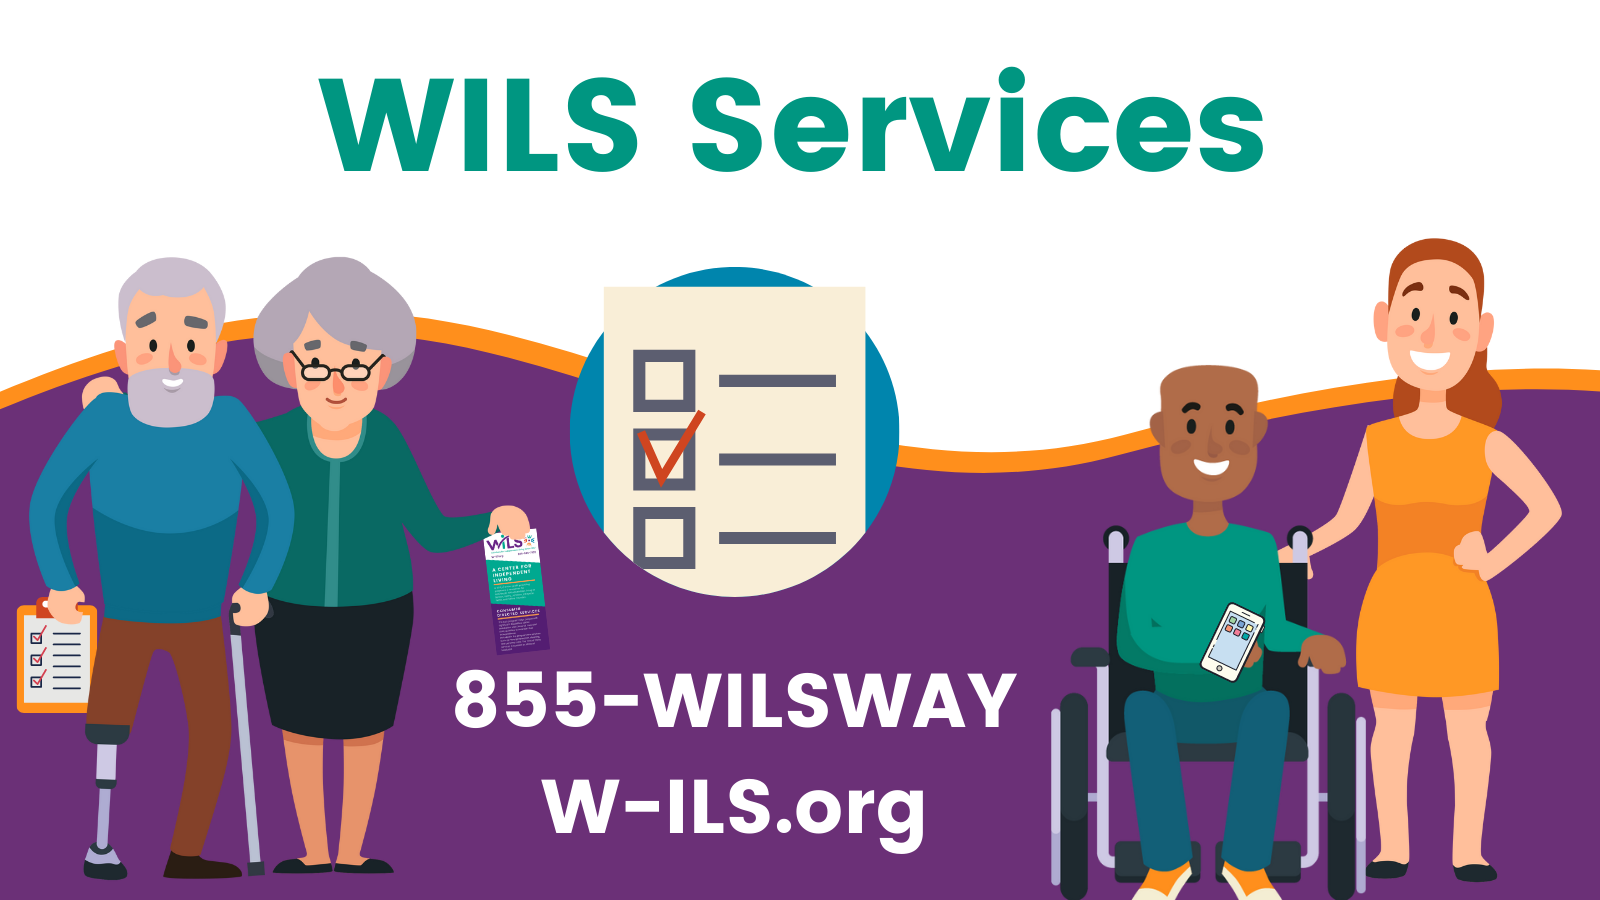 For WILS Services call 855-945-7929